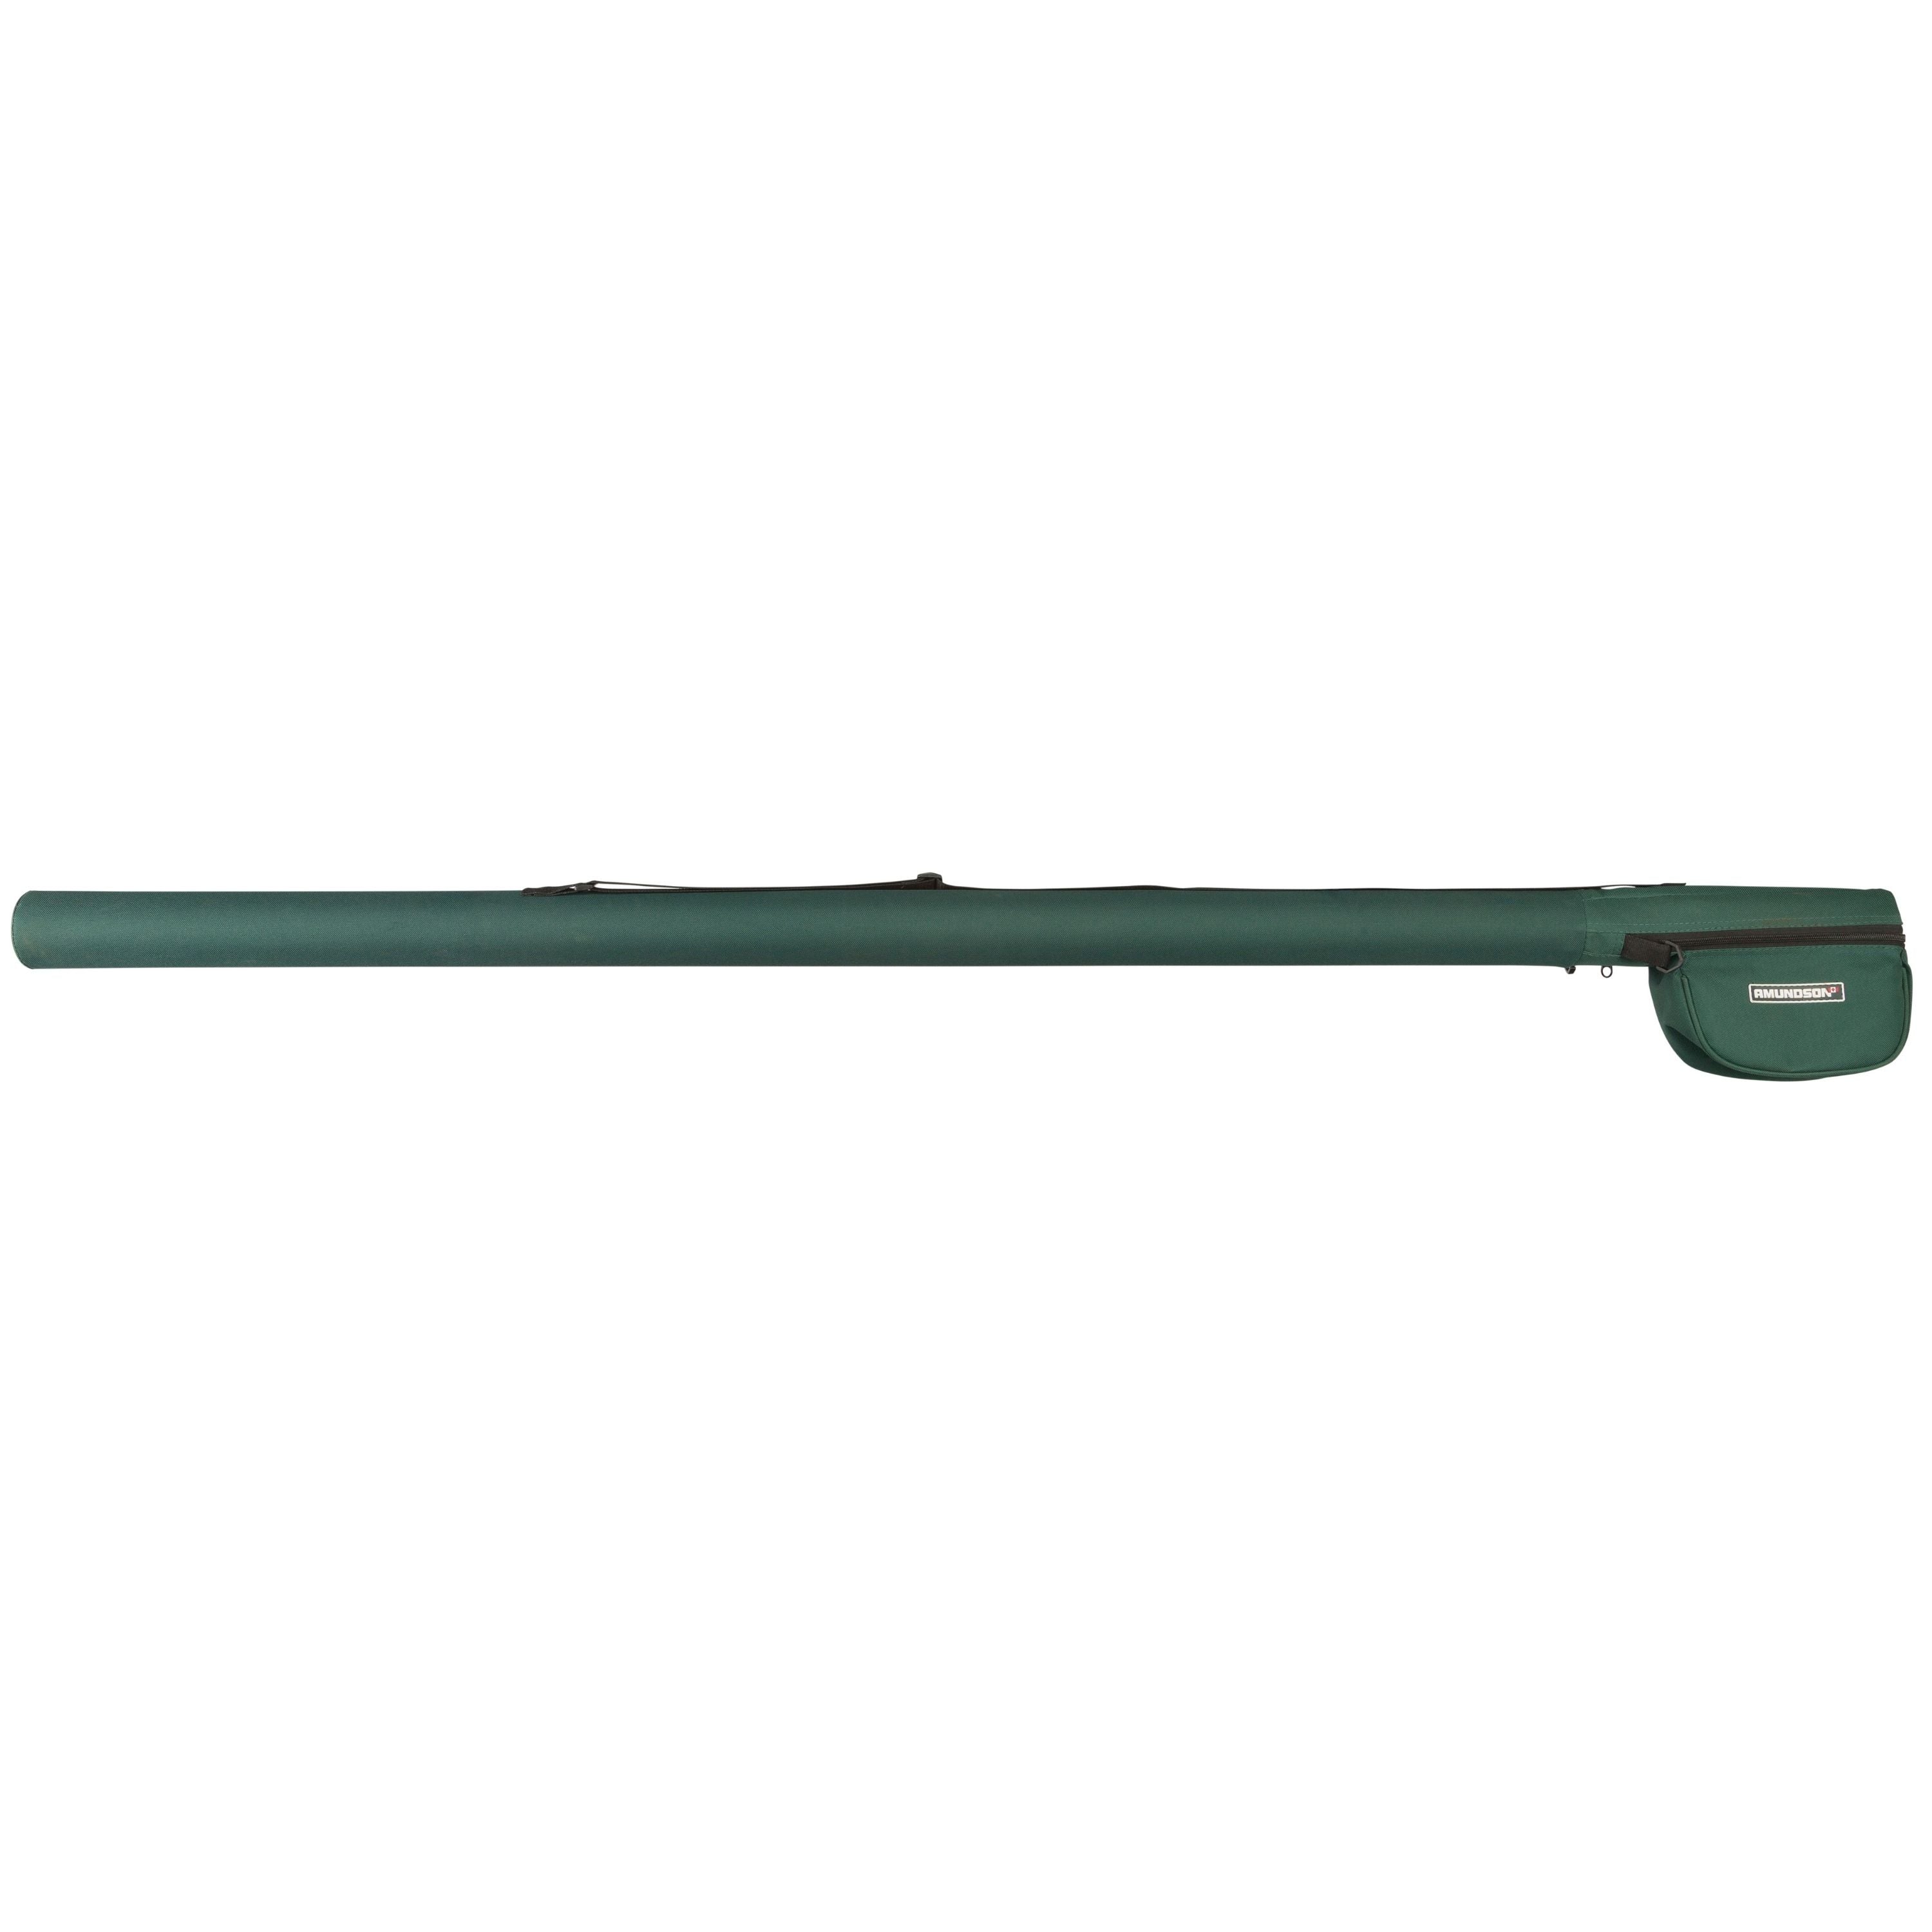 Rod Case/Tube for One-piece Rods on Delta - Rod Building and